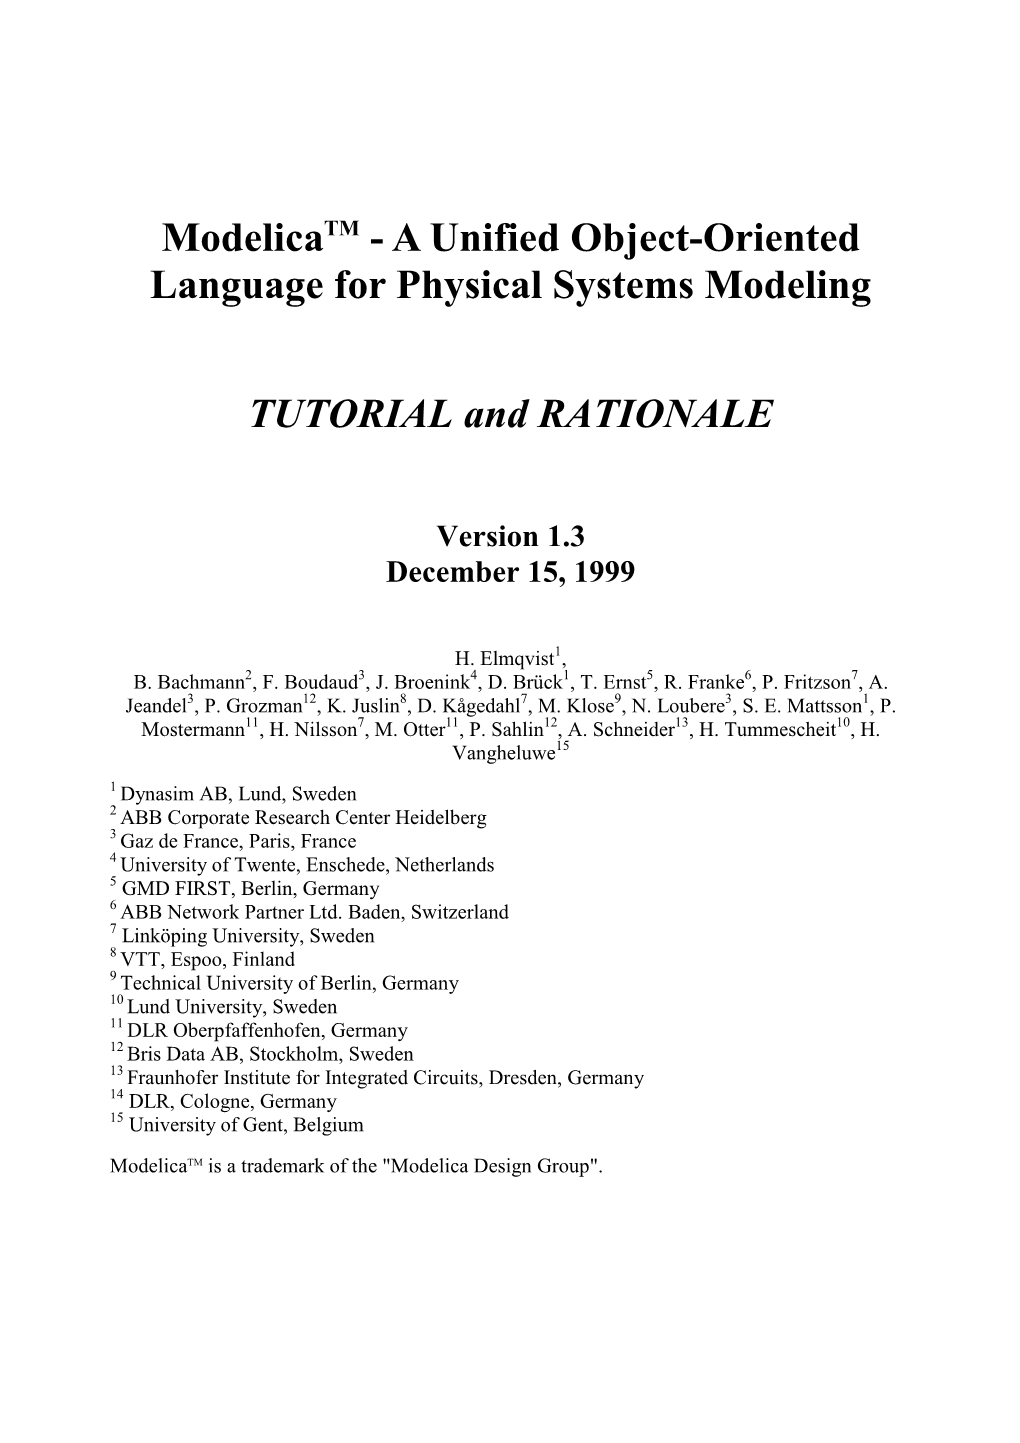 Modelica Tutorial and Rationale